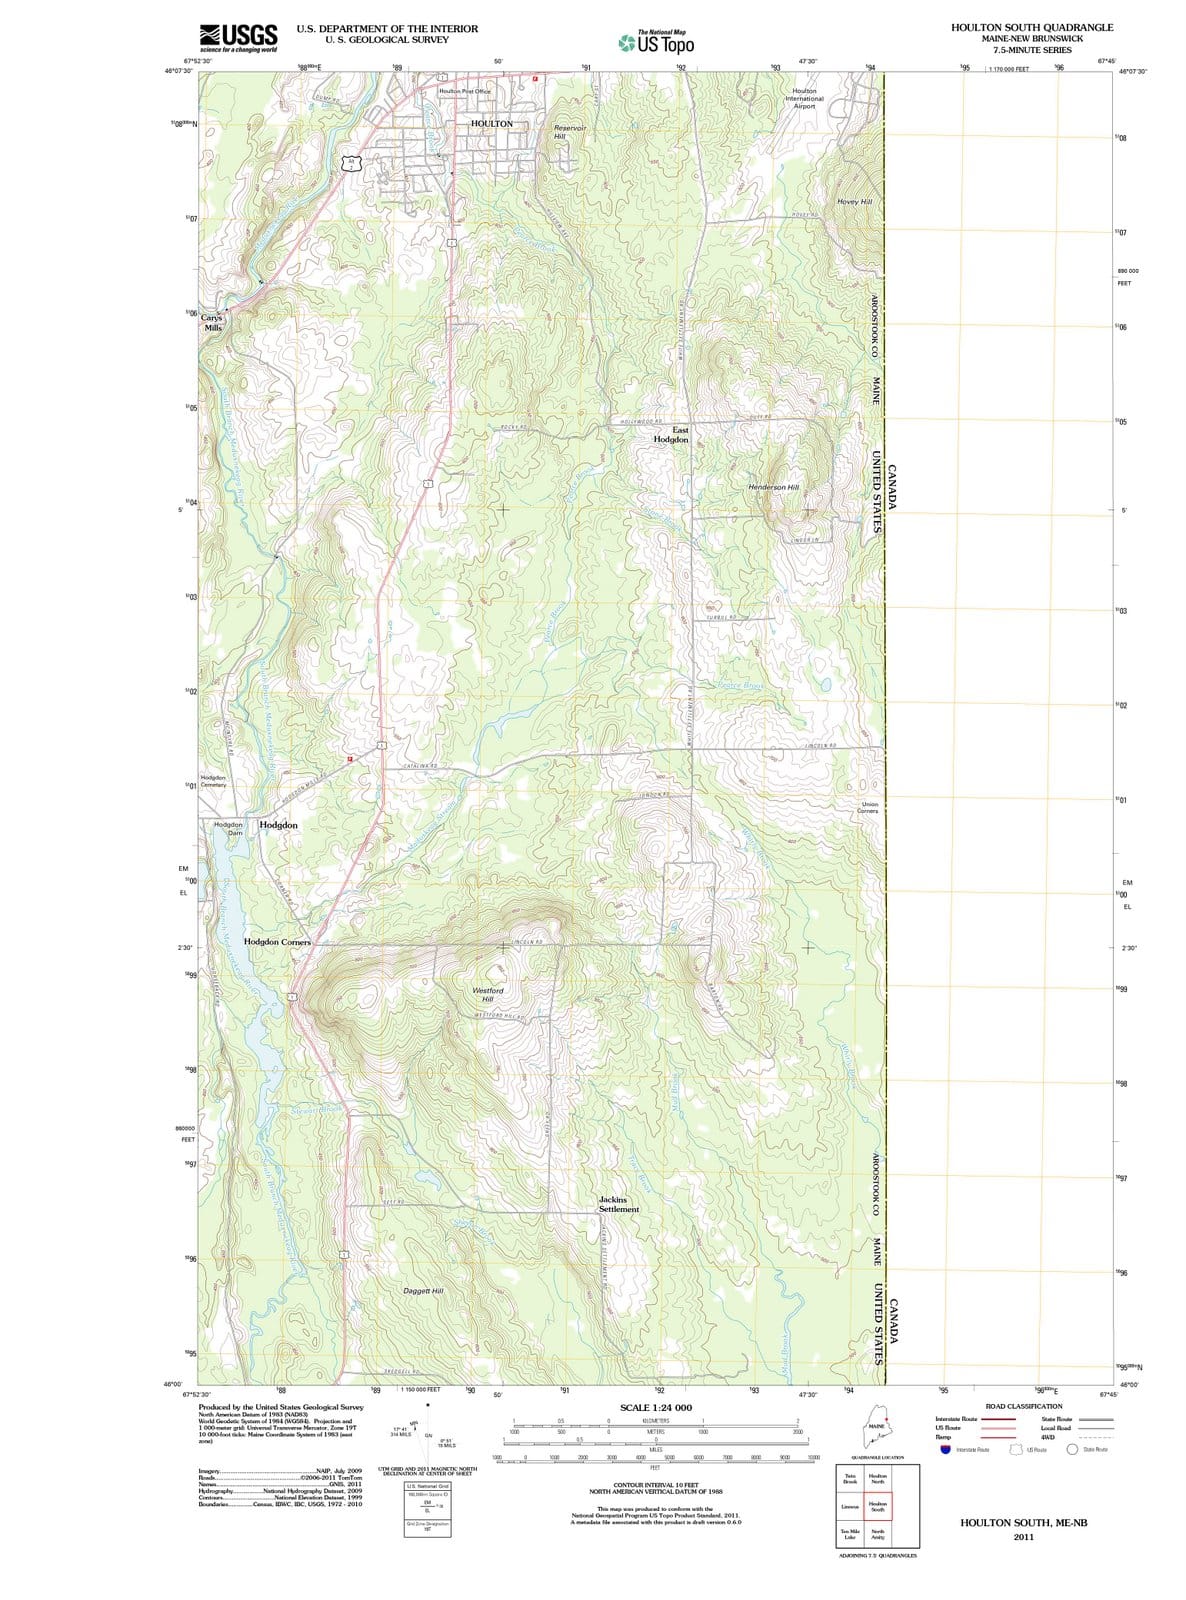 2011 Houlton South, ME - Maine - USGS Topographic Map